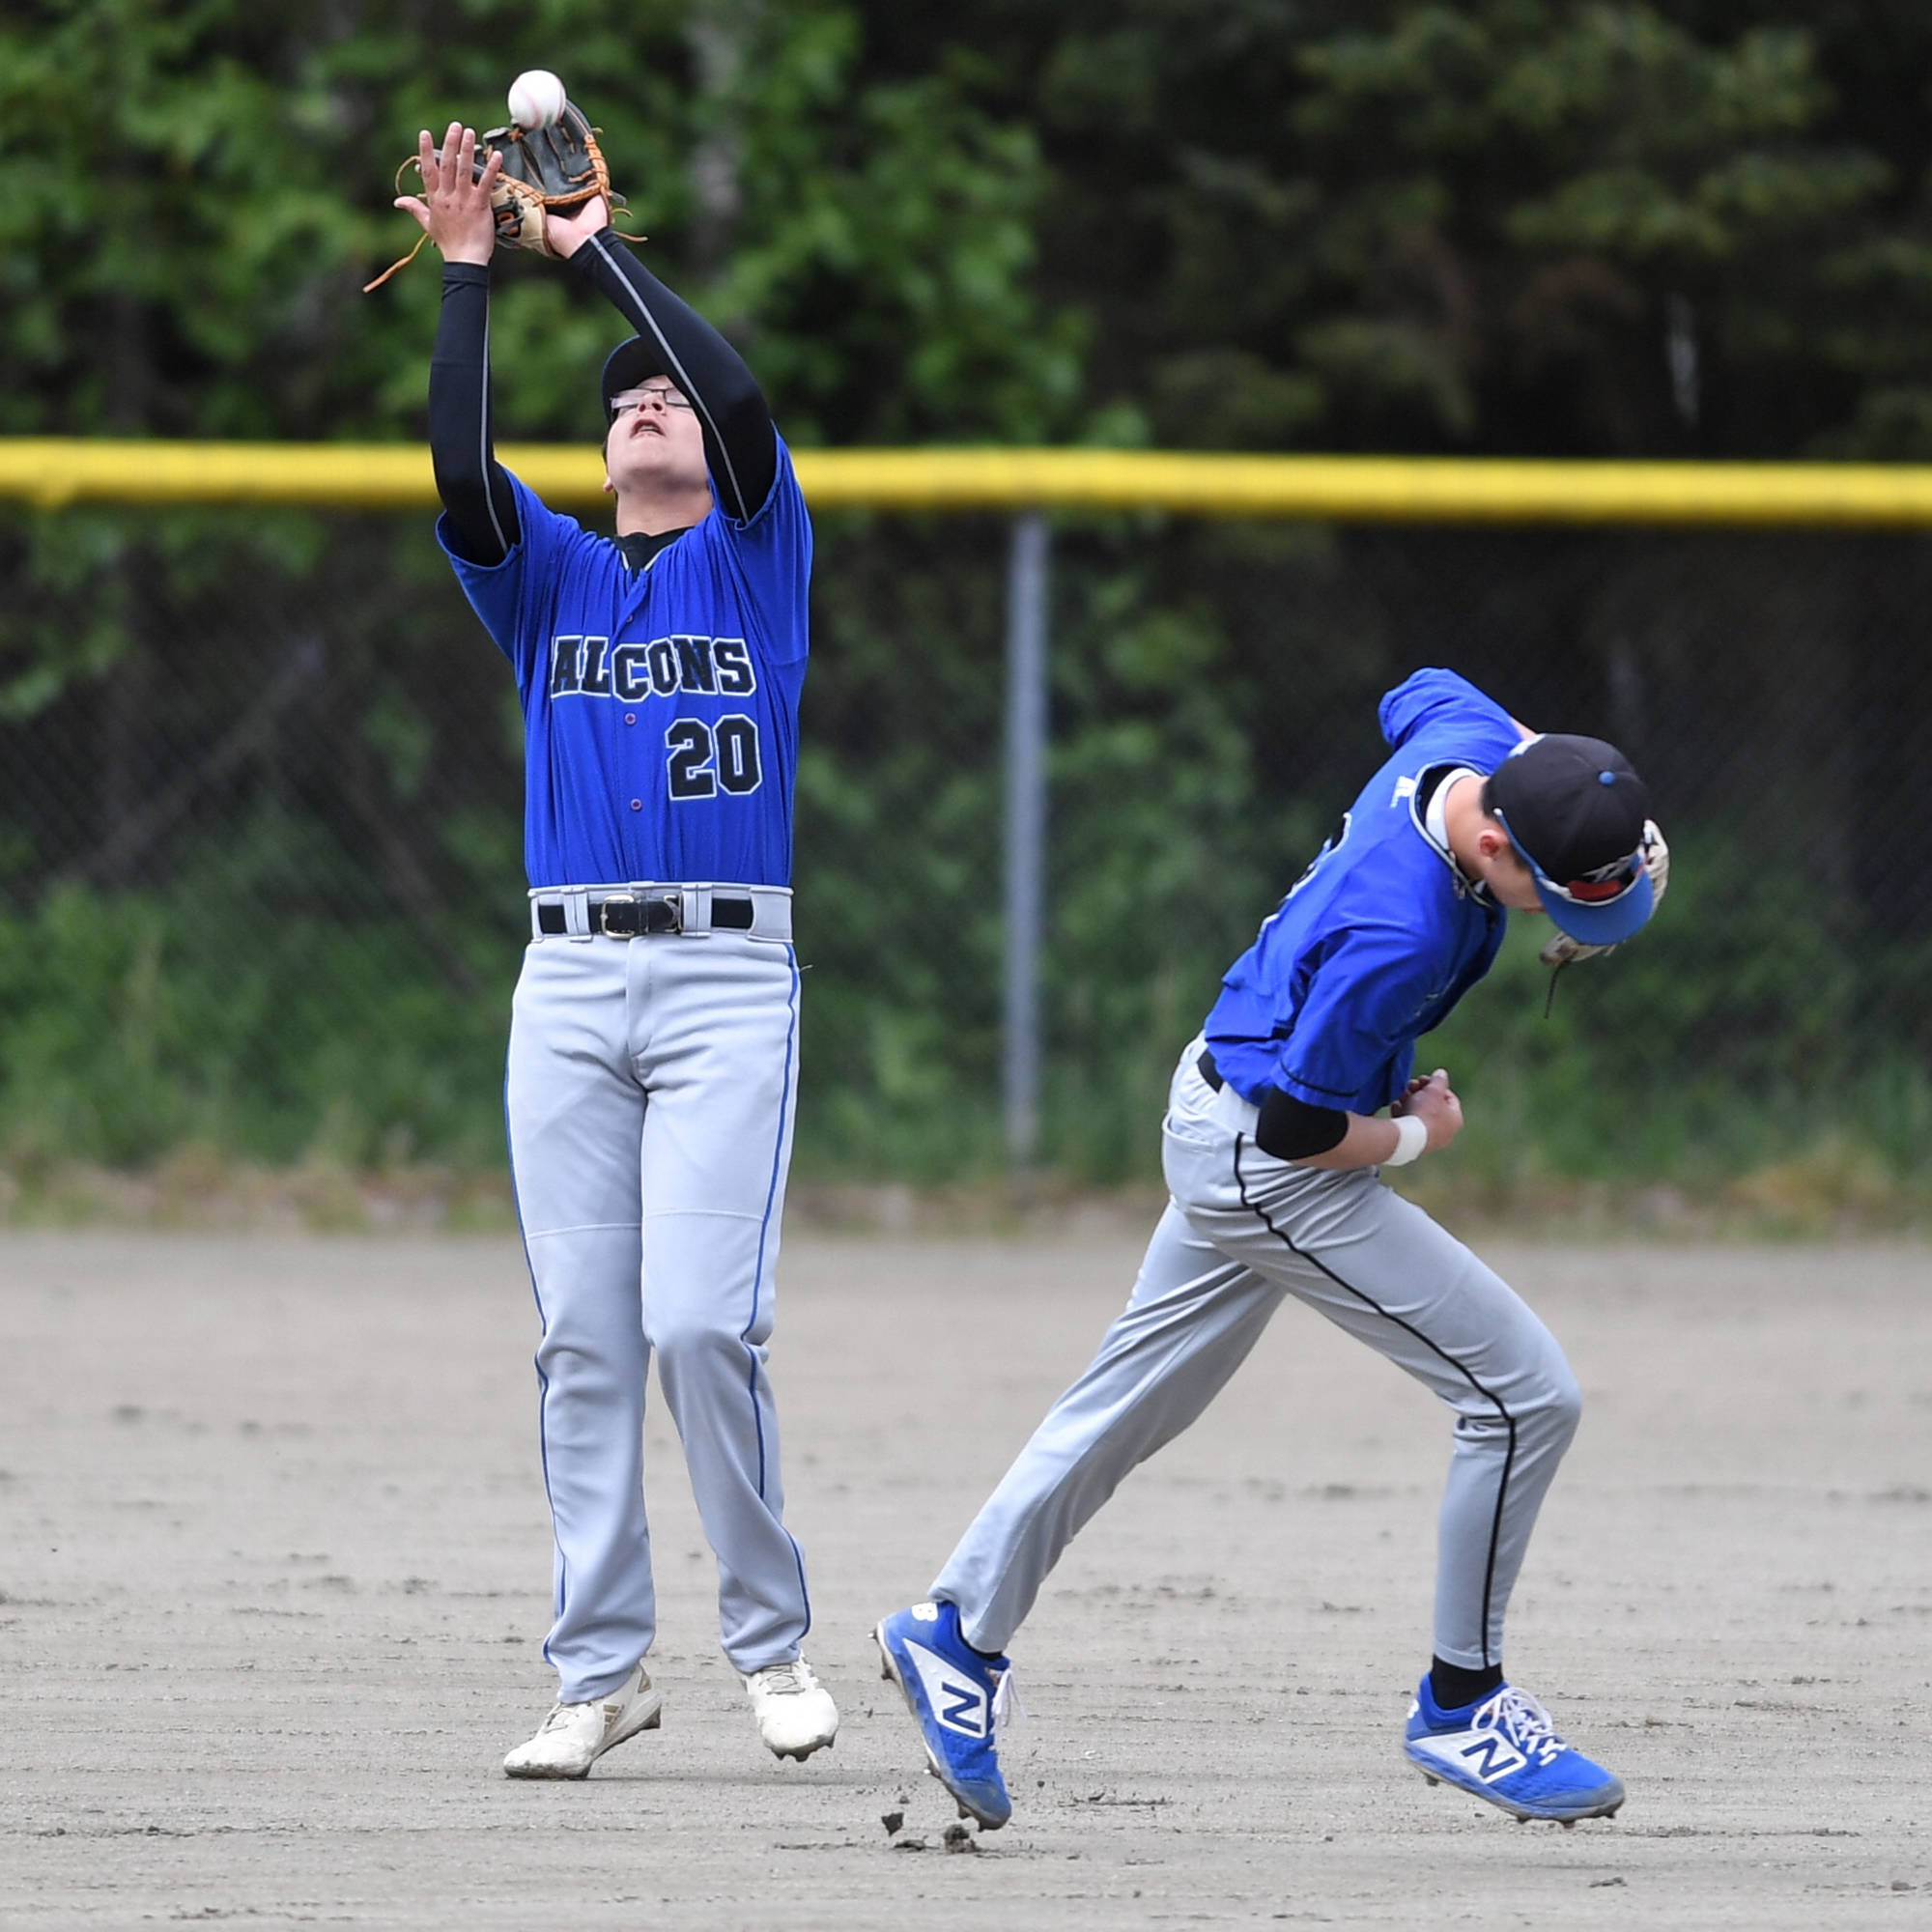 Thunder Mountain’s Oliver Mendoza catches a fly all against Sitka as teammate Bryson Echiverri ducks out of the way during the Region V Baseball Championship at Adair-Kennedy Memorial Park on Friday, May 24, 2019. TMHS lost 1-7. (Michael Penn | Juneau Empire)